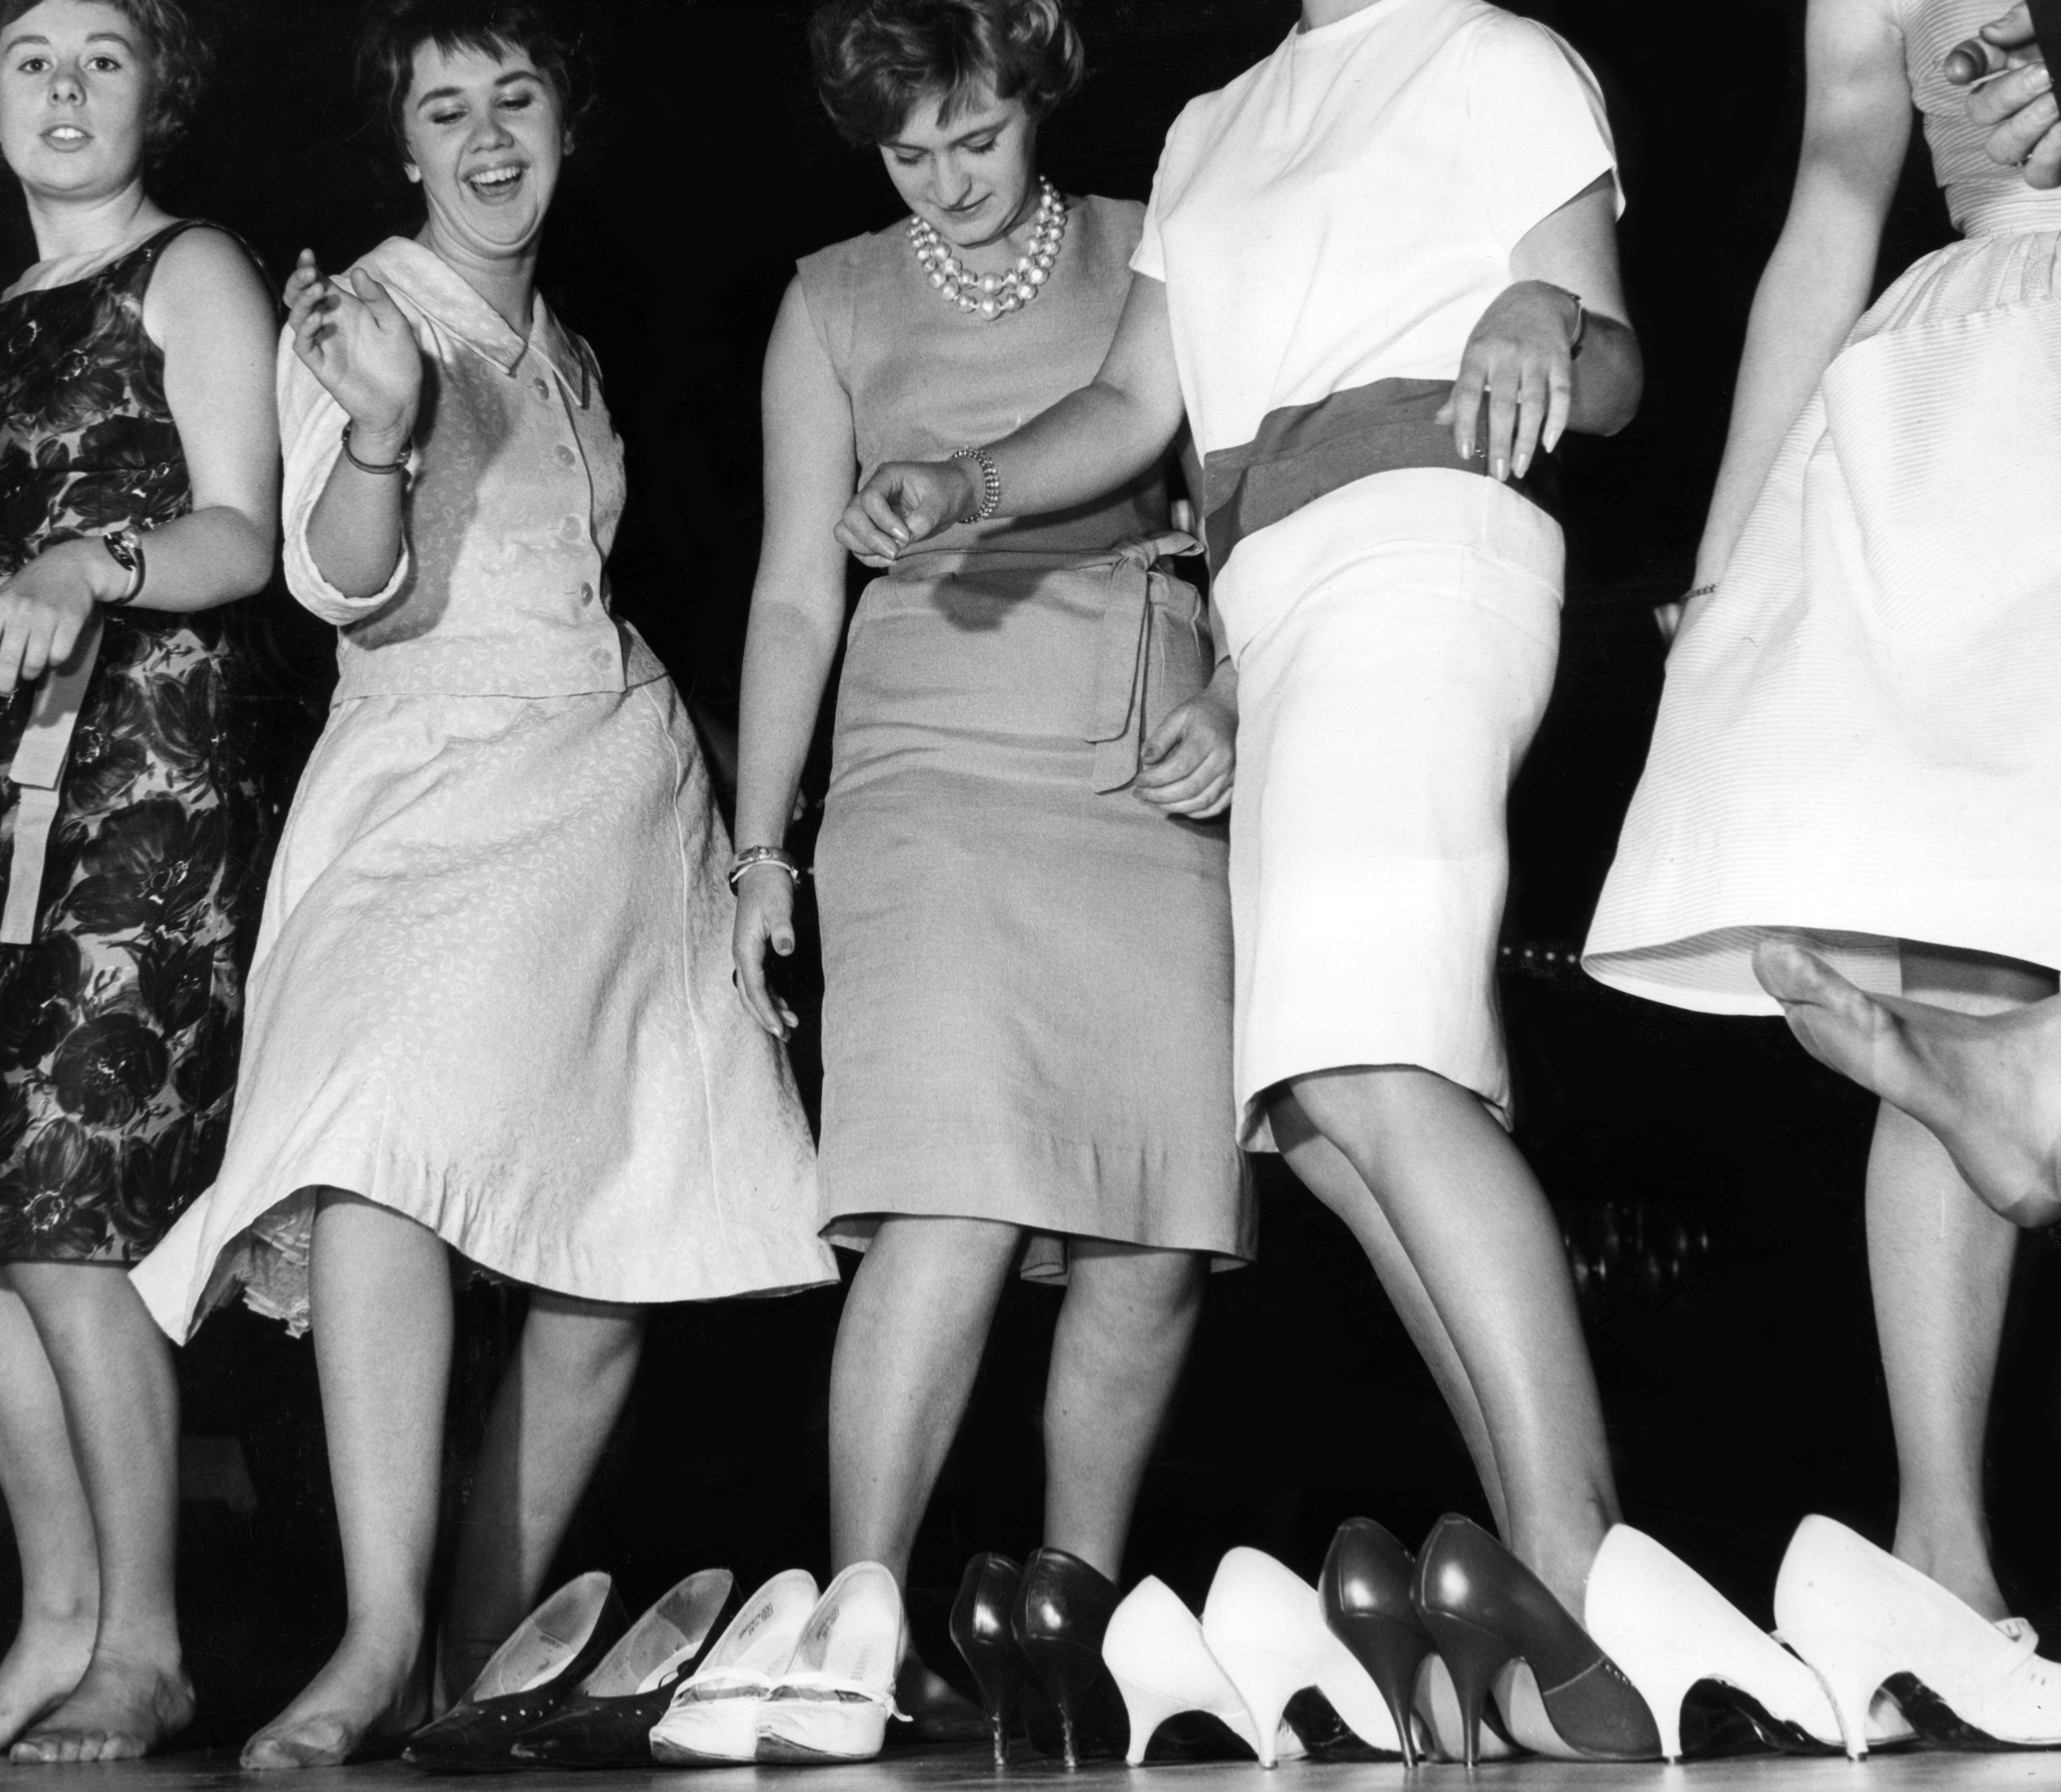 High heels discarded as the girls join in the high jinks at the Locarno nightclub in Glasgow. September 27 1962. (Photo by Staff/Mirrorpix/Getty Images)